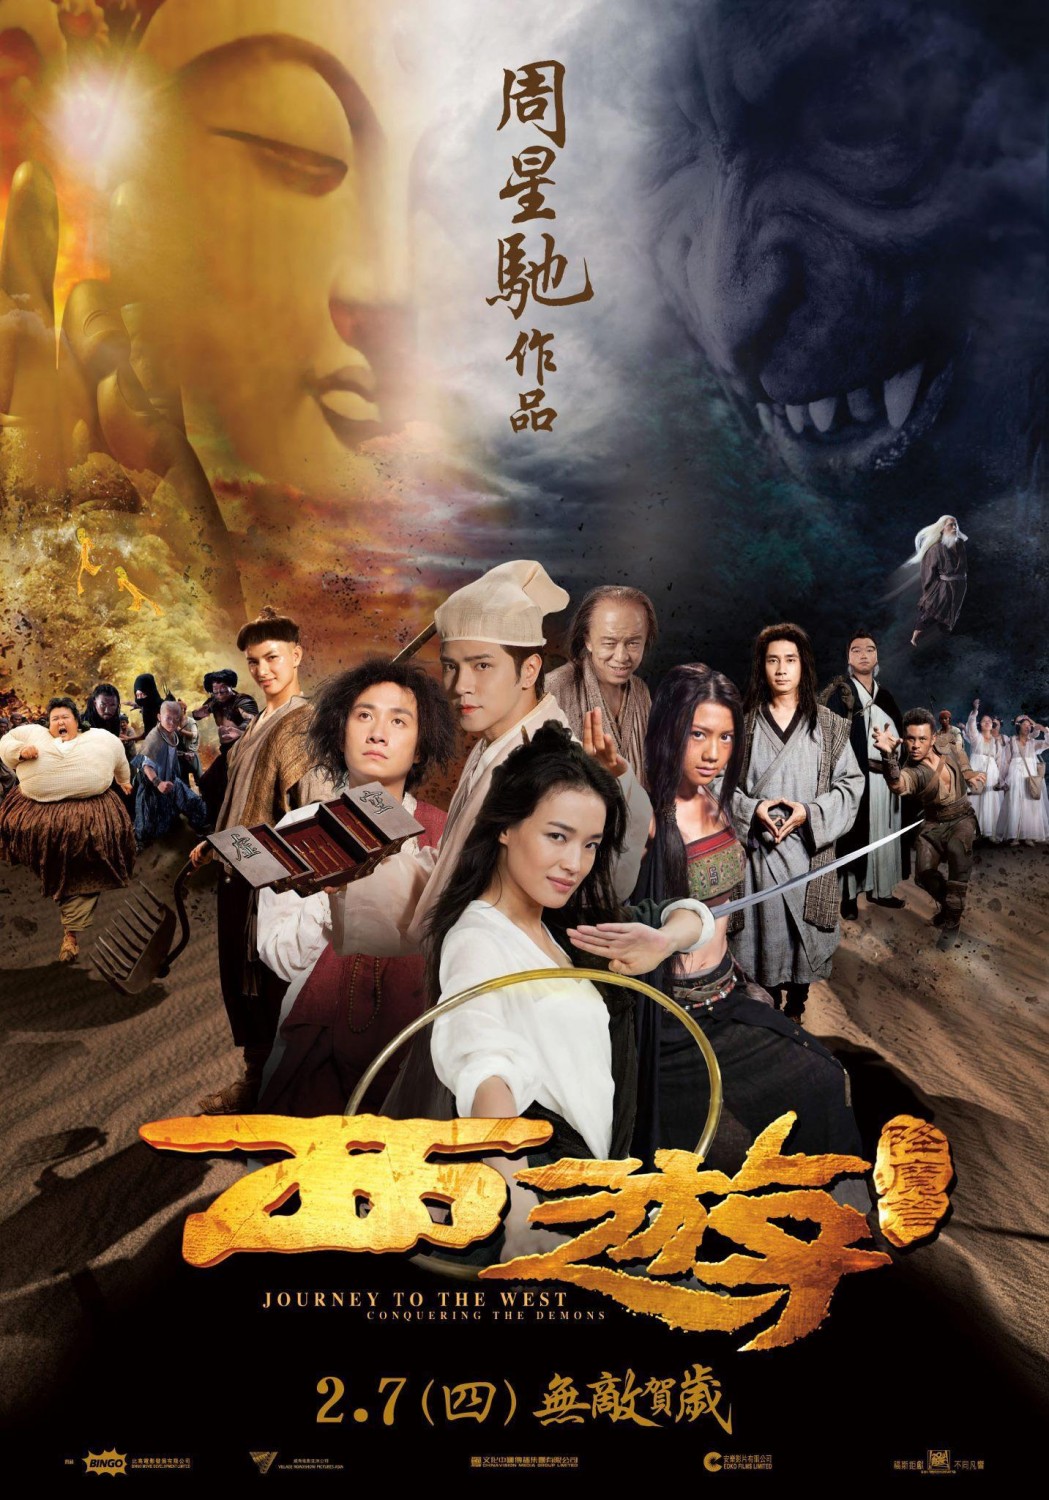 Extra Large Movie Poster Image for Xi you xiang mo pian (#1 of 2)